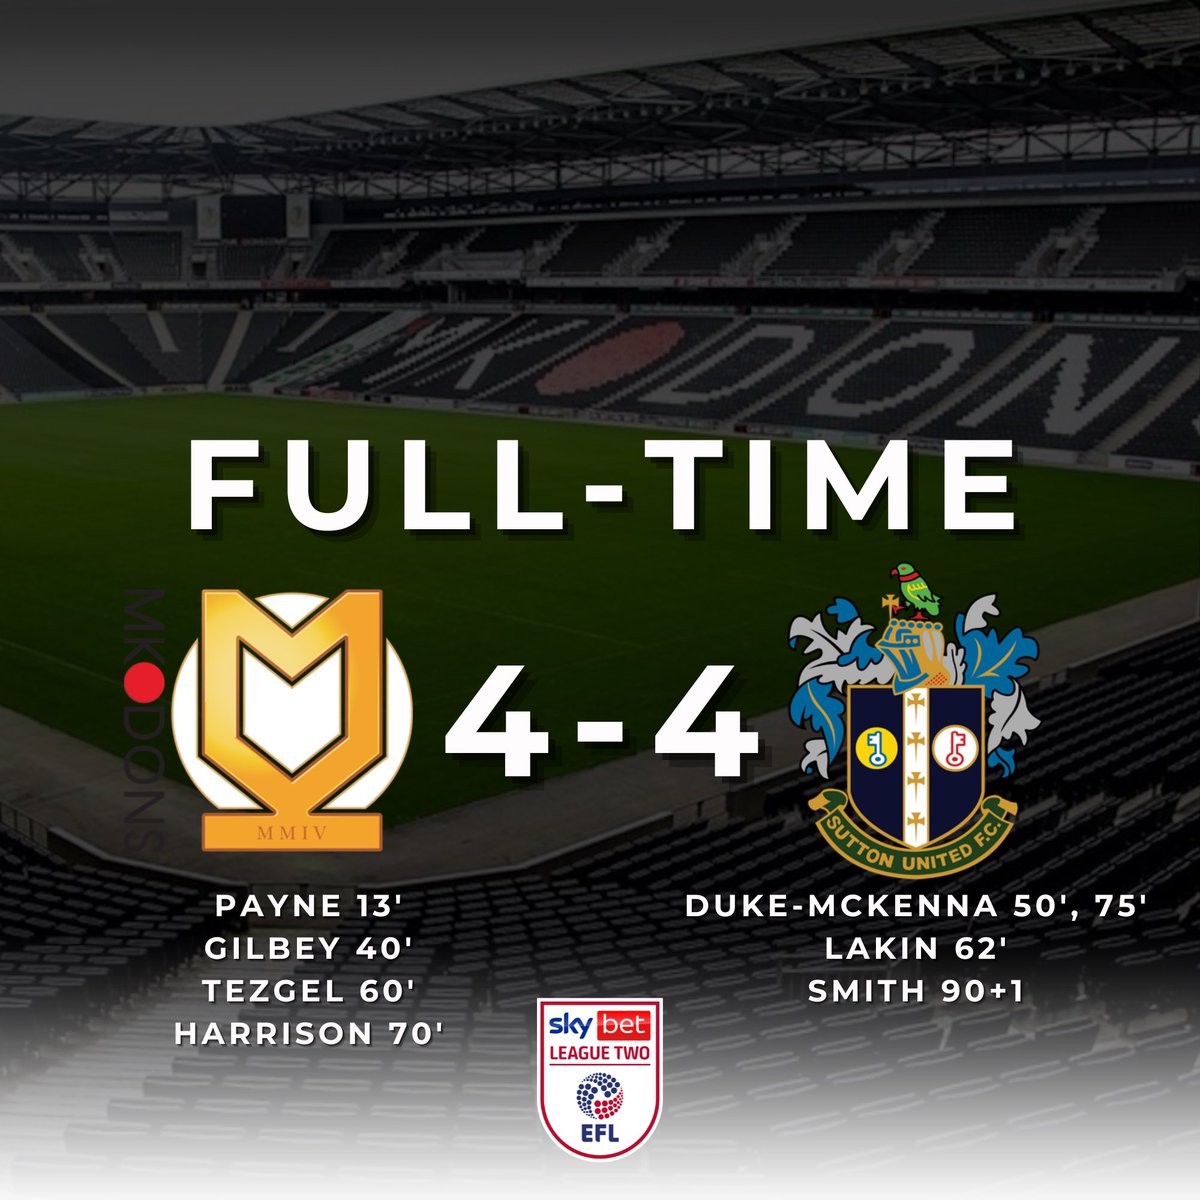 𝗙𝘂𝗹𝗹 𝘁𝗶𝗺𝗲 | 4-4

We took it to the final day against all probability. Thank you for your undying support through this difficult season. We dust ourselves off and go again.

To the @EFL it’s goodbye for now, see you again soon. 

We are #ForeverAmber 

#suttonunited